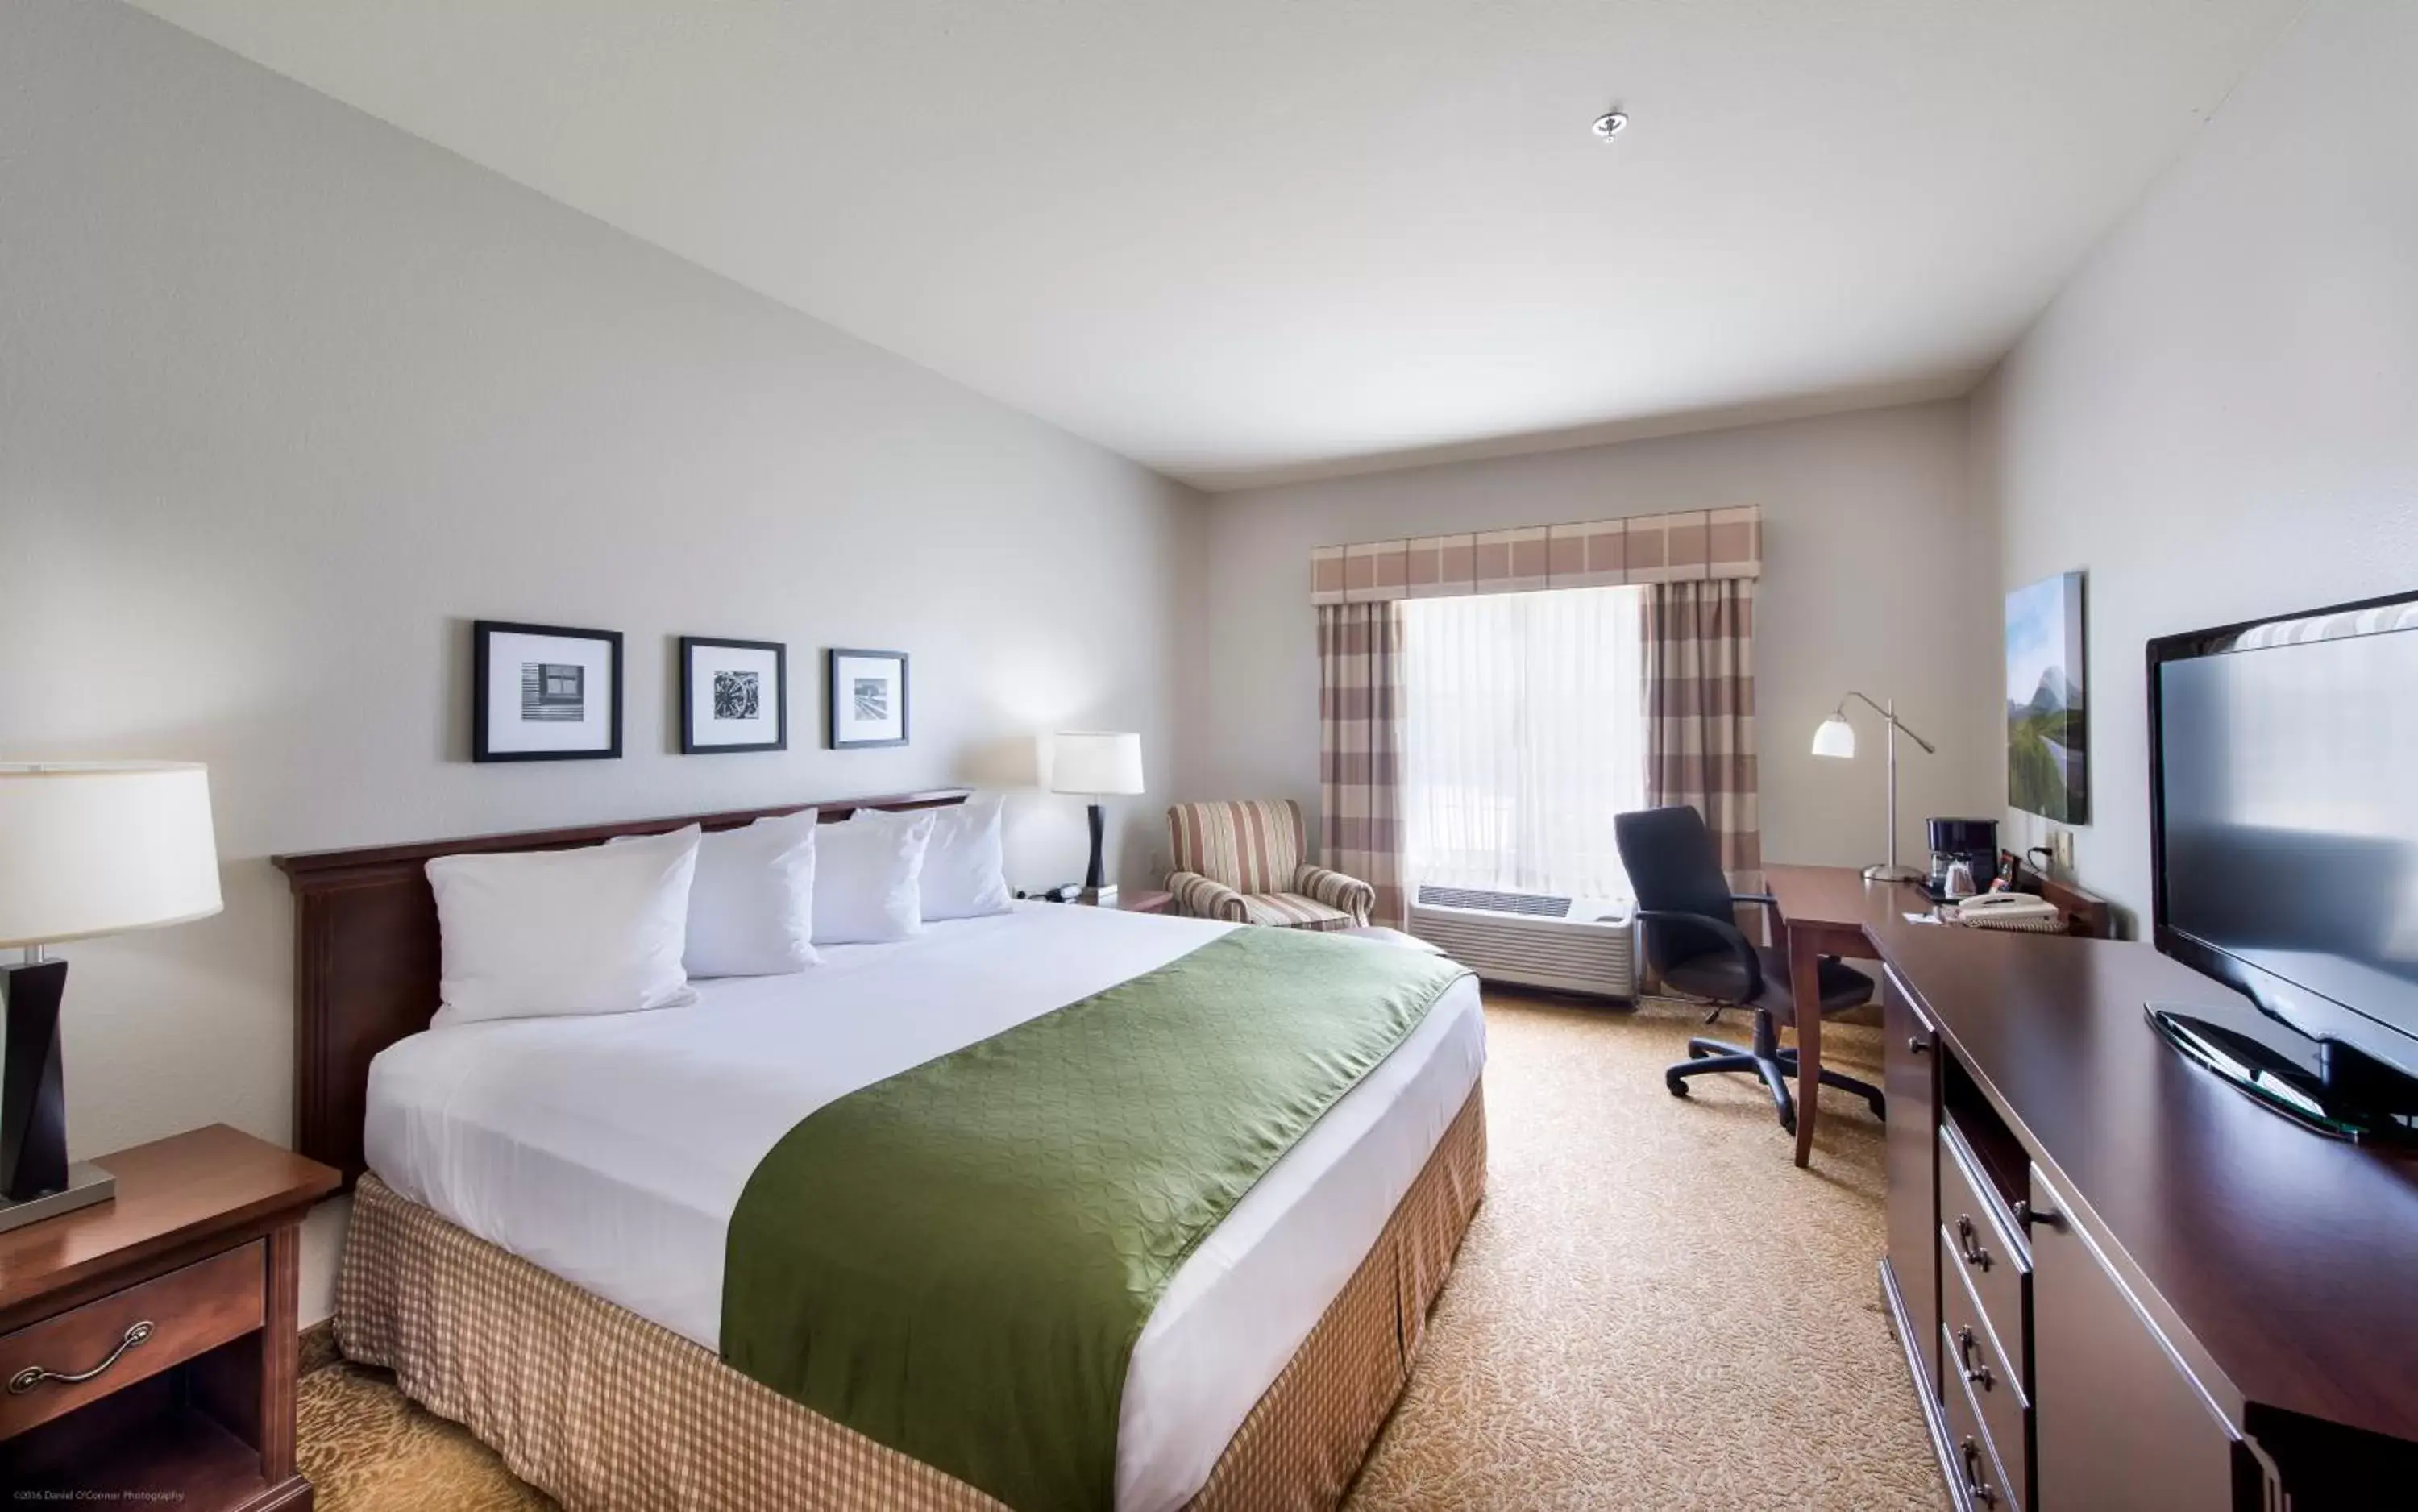 Day, Room Photo in Country Inn & Suites by Radisson, Greeley, CO